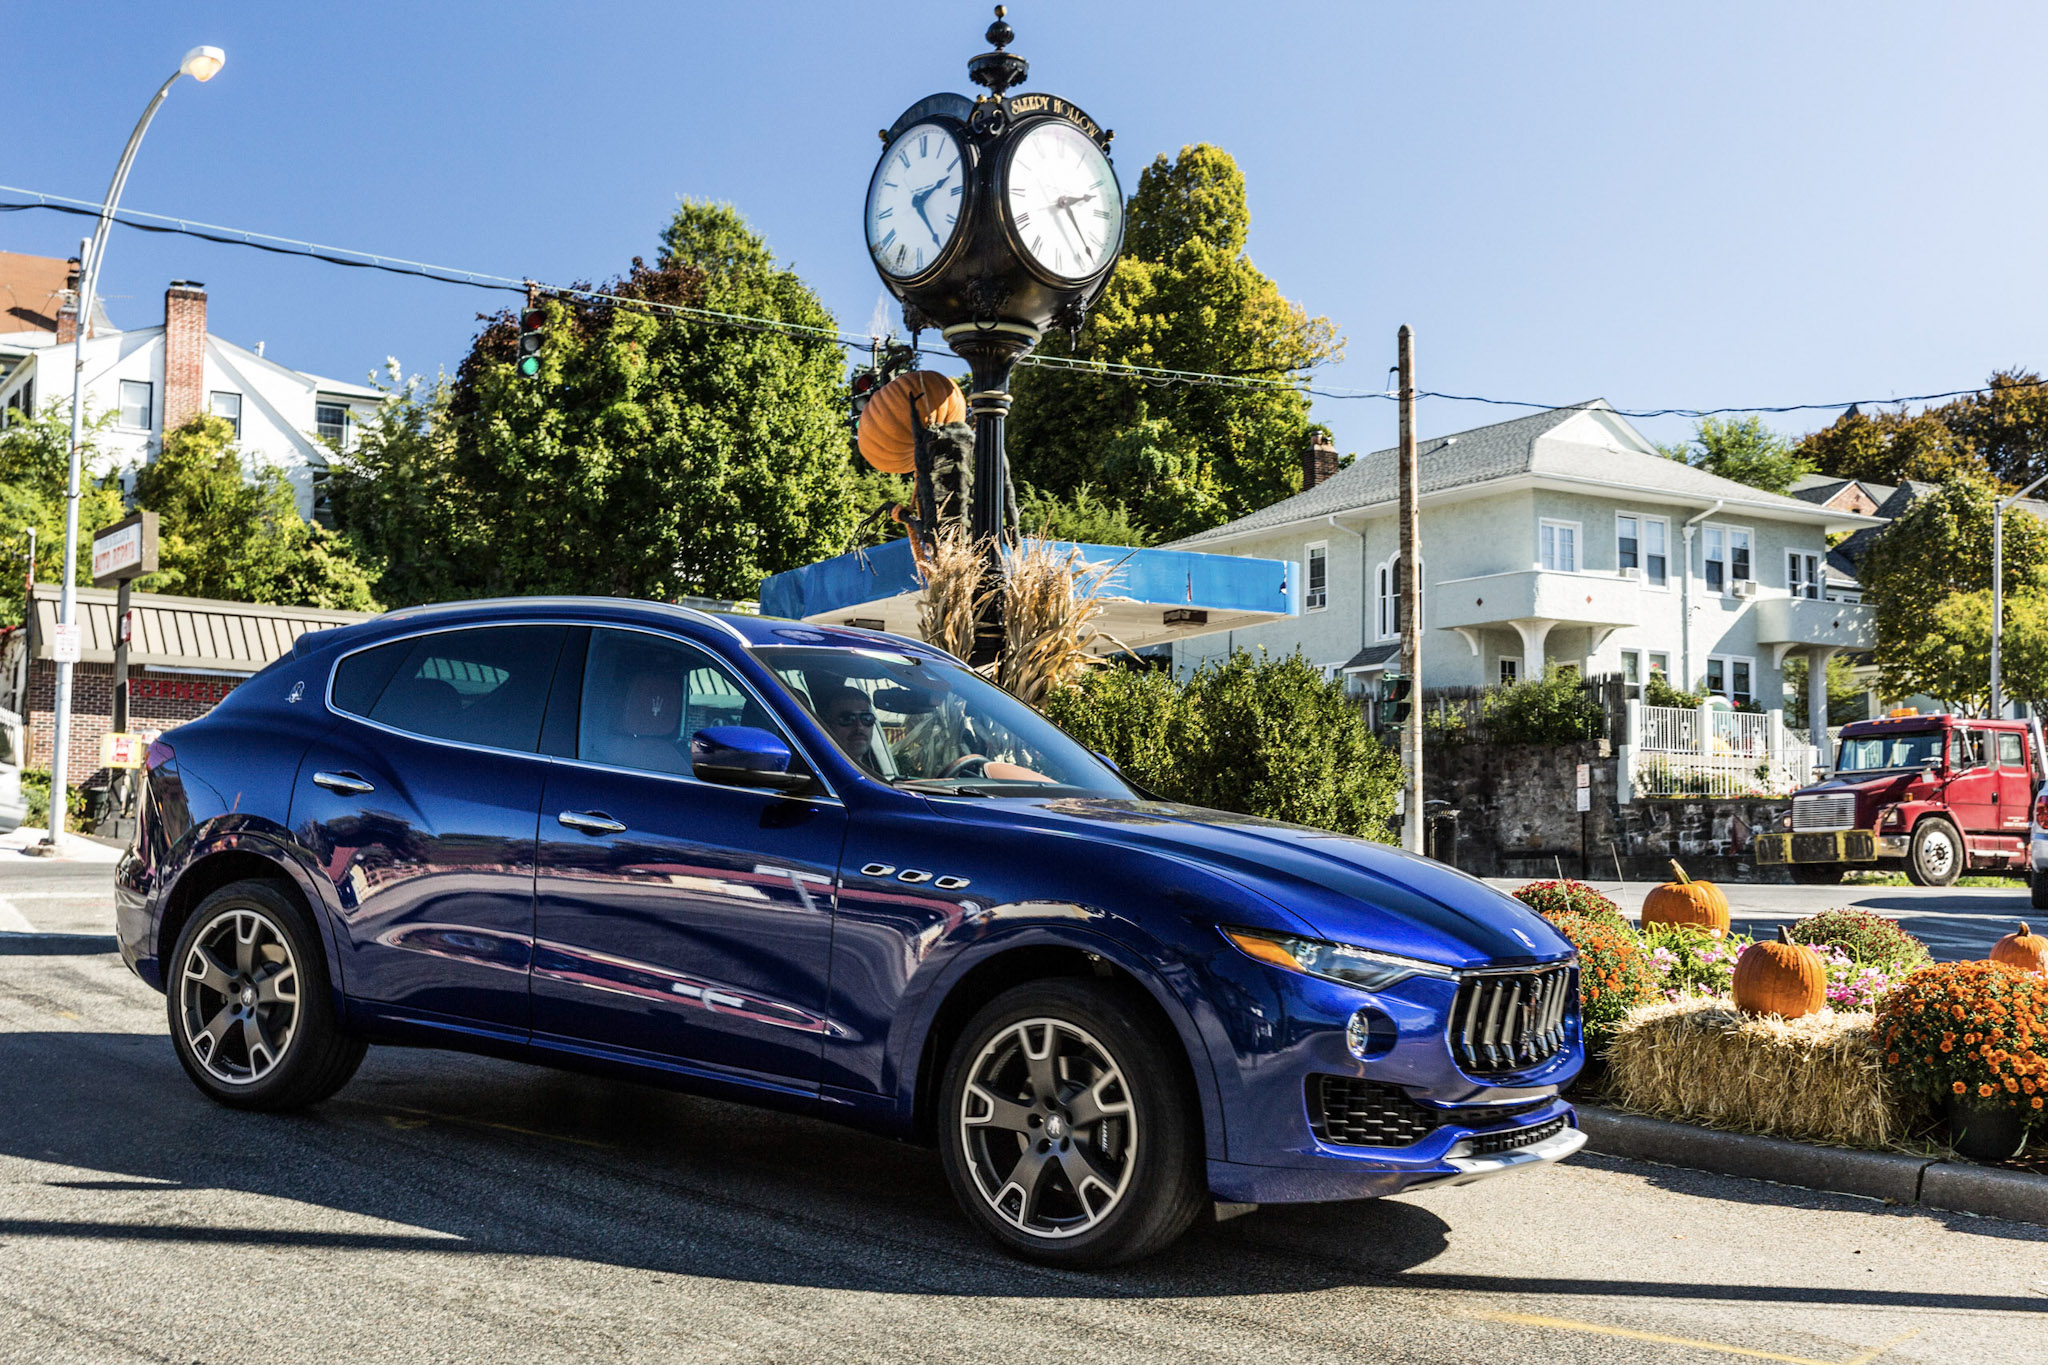 PHOTO: Maserati's Levante is powered by a 3.0L, V6 twin-turbo gasoline engine built by Ferrari. The SUV is available in two different engine configurations: 345hp and 424hp (LevanteS).